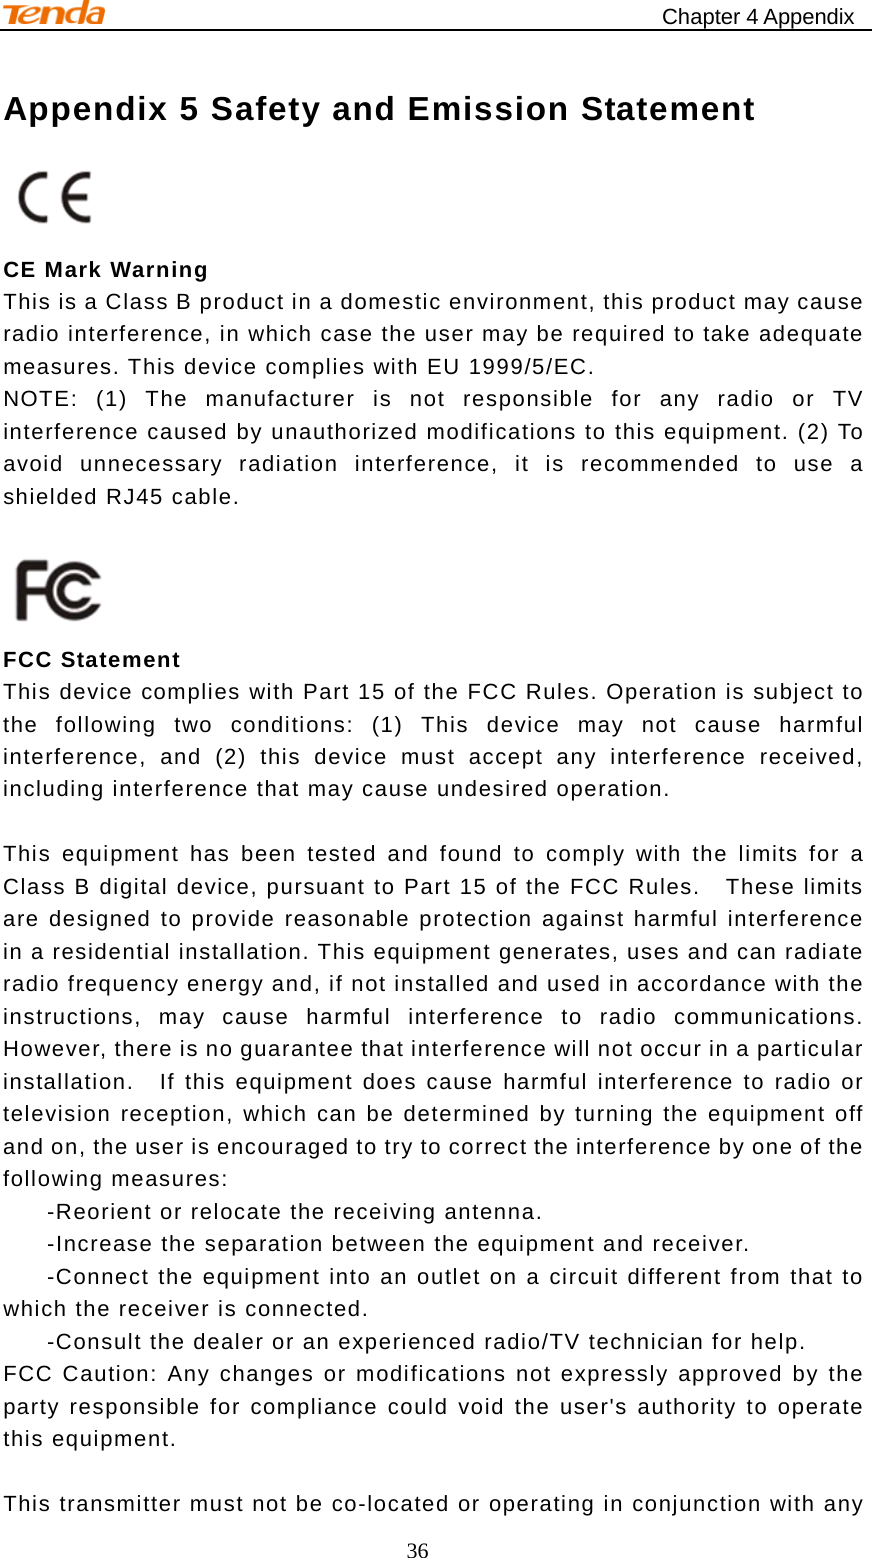                                                    Chapter 4 Appendix 36 Appendix 5 Safety and Emission Statement    CE Mark Warning This is a Class B product in a domestic environment, this product may cause radio interference, in which case the user may be required to take adequate measures. This device complies with EU 1999/5/EC. NOTE: (1) The manufacturer is not responsible for any radio or TV interference caused by unauthorized modifications to this equipment. (2) To avoid unnecessary radiation interference, it is recommended to use a shielded RJ45 cable.   FCC Statement This device complies with Part 15 of the FCC Rules. Operation is subject to the following two conditions: (1) This device may not cause harmful interference, and (2) this device must accept any interference received, including interference that may cause undesired operation.    This equipment has been tested and found to comply with the limits for a Class B digital device, pursuant to Part 15 of the FCC Rules.    These limits are designed to provide reasonable protection against harmful interference in a residential installation. This equipment generates, uses and can radiate radio frequency energy and, if not installed and used in accordance with the instructions, may cause harmful interference to radio communications.  However, there is no guarantee that interference will not occur in a particular installation.  If this equipment does cause harmful interference to radio or television reception, which can be determined by turning the equipment off and on, the user is encouraged to try to correct the interference by one of the following measures:   -Reorient or relocate the receiving antenna.   -Increase the separation between the equipment and receiver.   -Connect the equipment into an outlet on a circuit different from that to which the receiver is connected.   -Consult the dealer or an experienced radio/TV technician for help. FCC Caution: Any changes or modifications not expressly approved by the party responsible for compliance could void the user&apos;s authority to operate this equipment.    This transmitter must not be co-located or operating in conjunction with any 